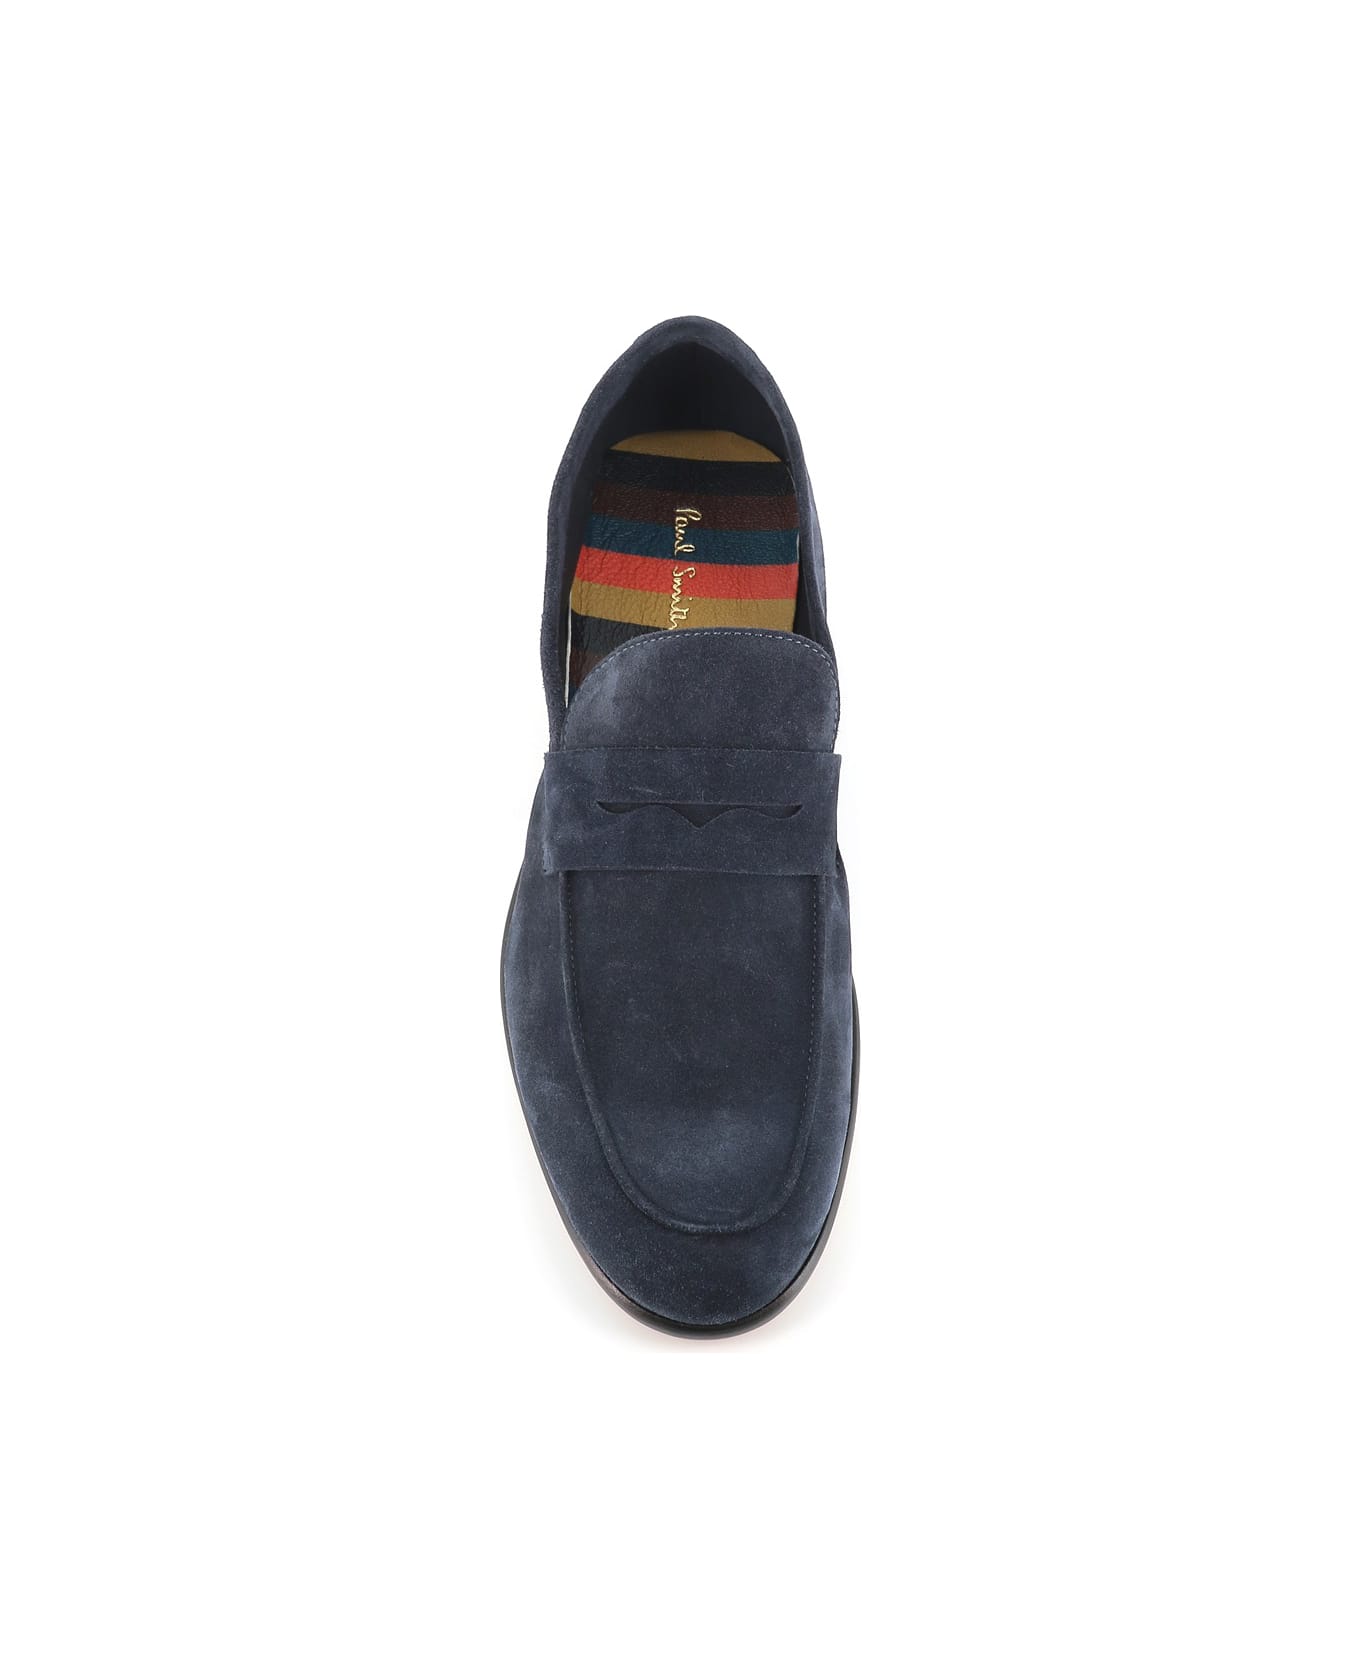 Paul Smith Loafer Figaro - Blue